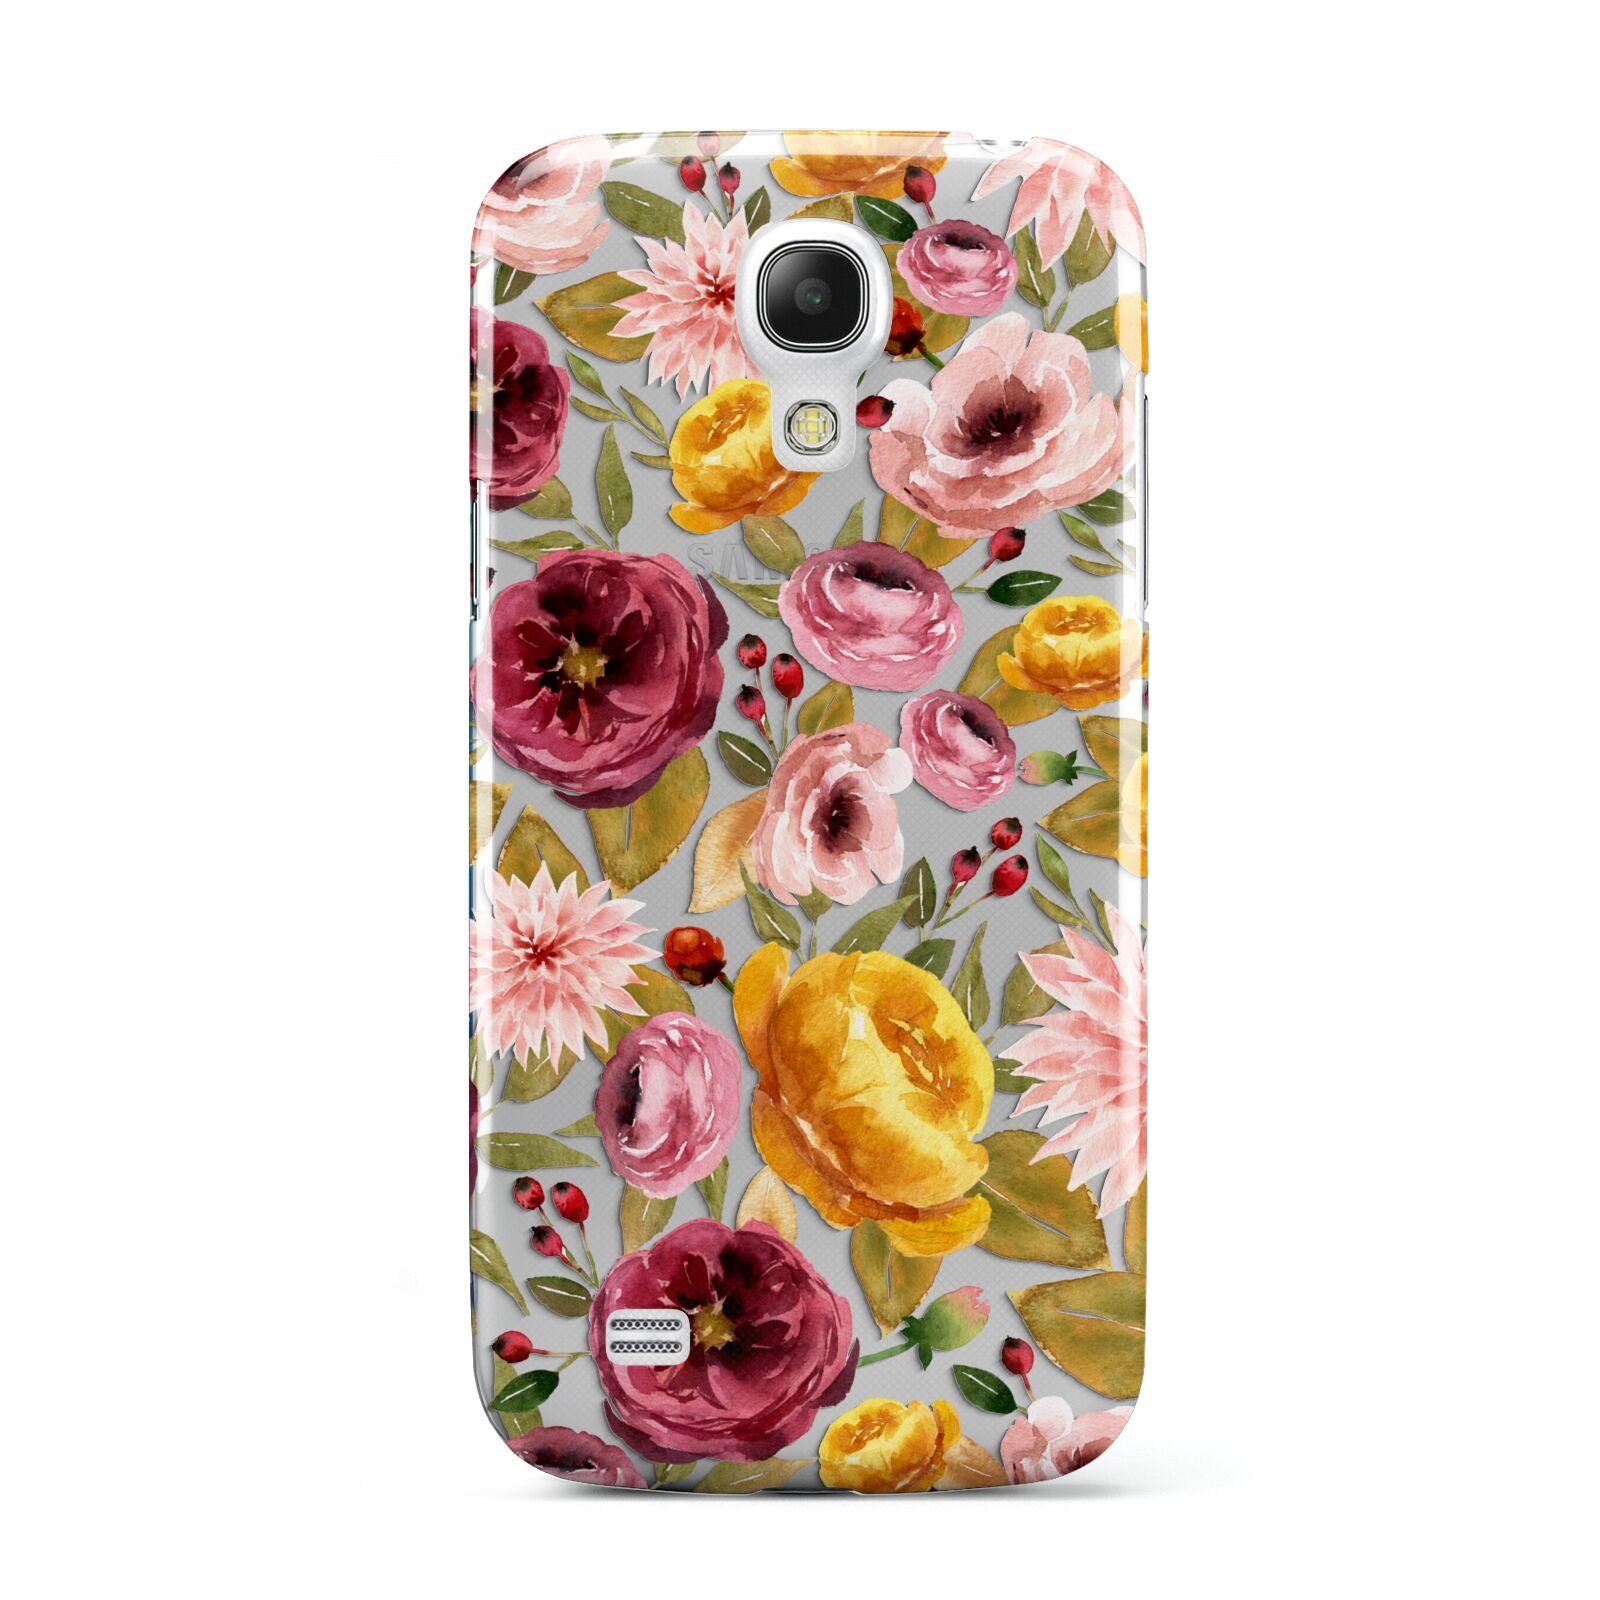 Pink and Mustard Floral Samsung Galaxy S4 Mini Case